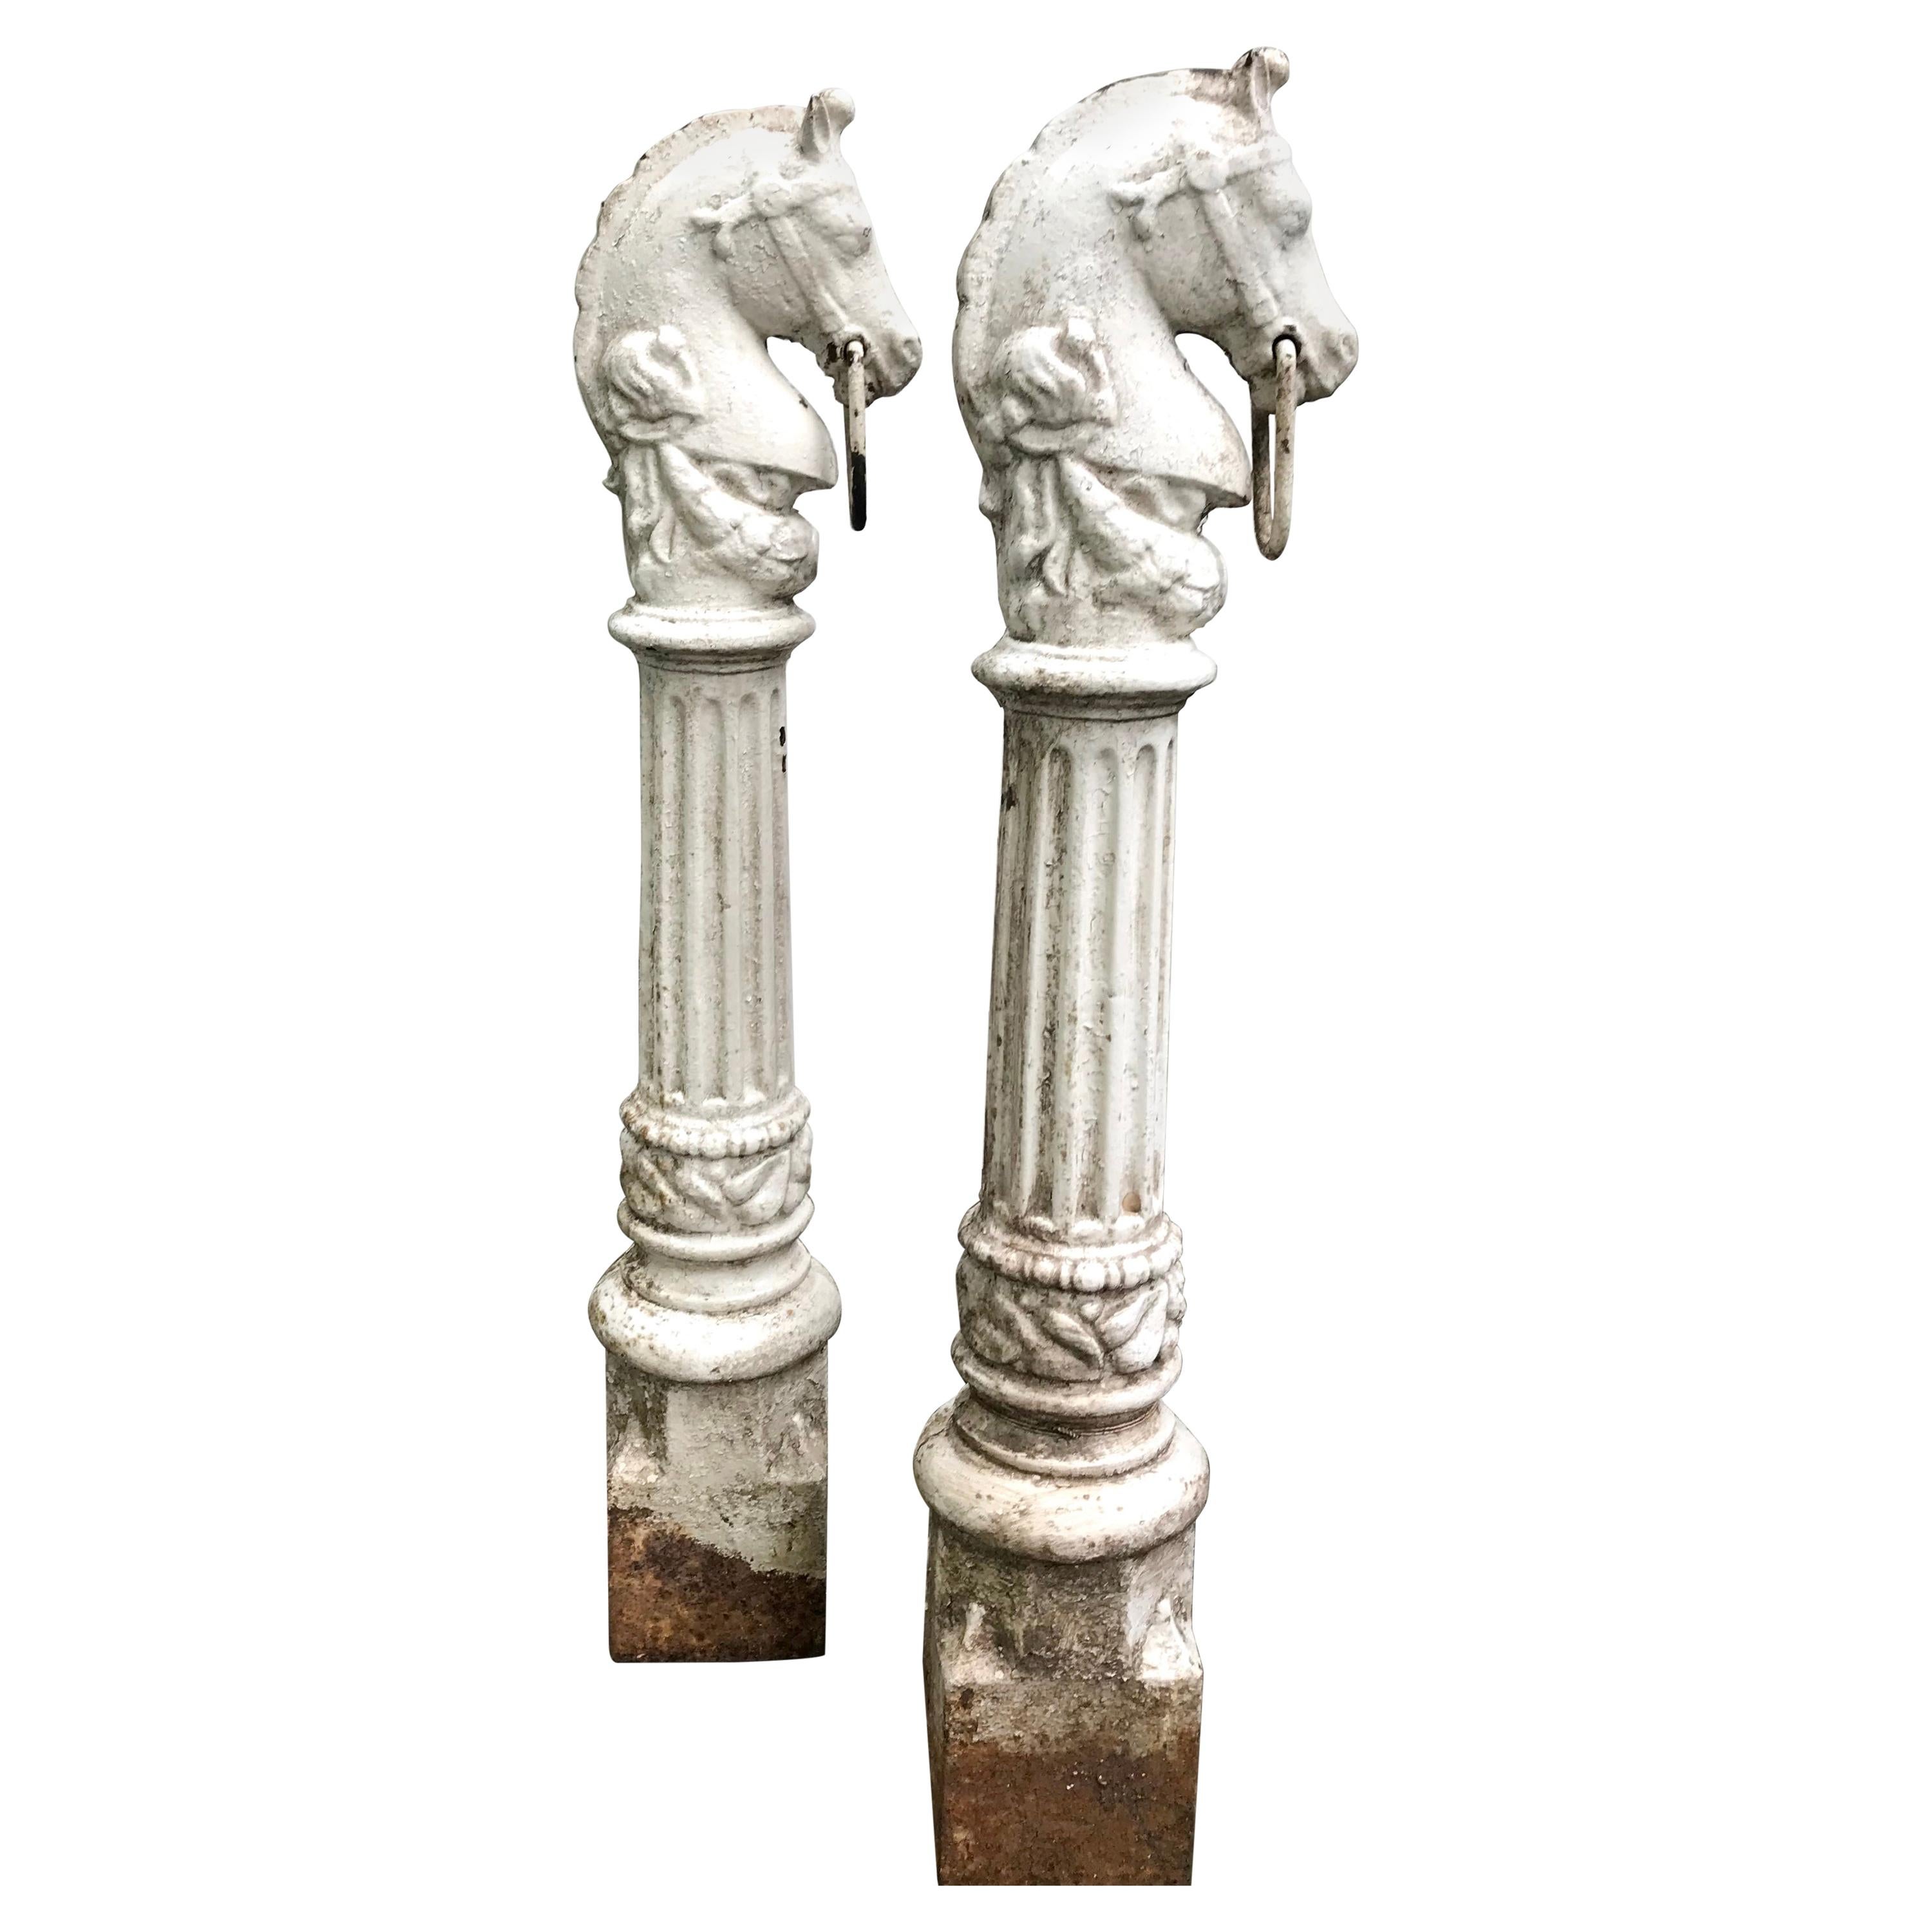 Pair of Horse Head Hitching Posts